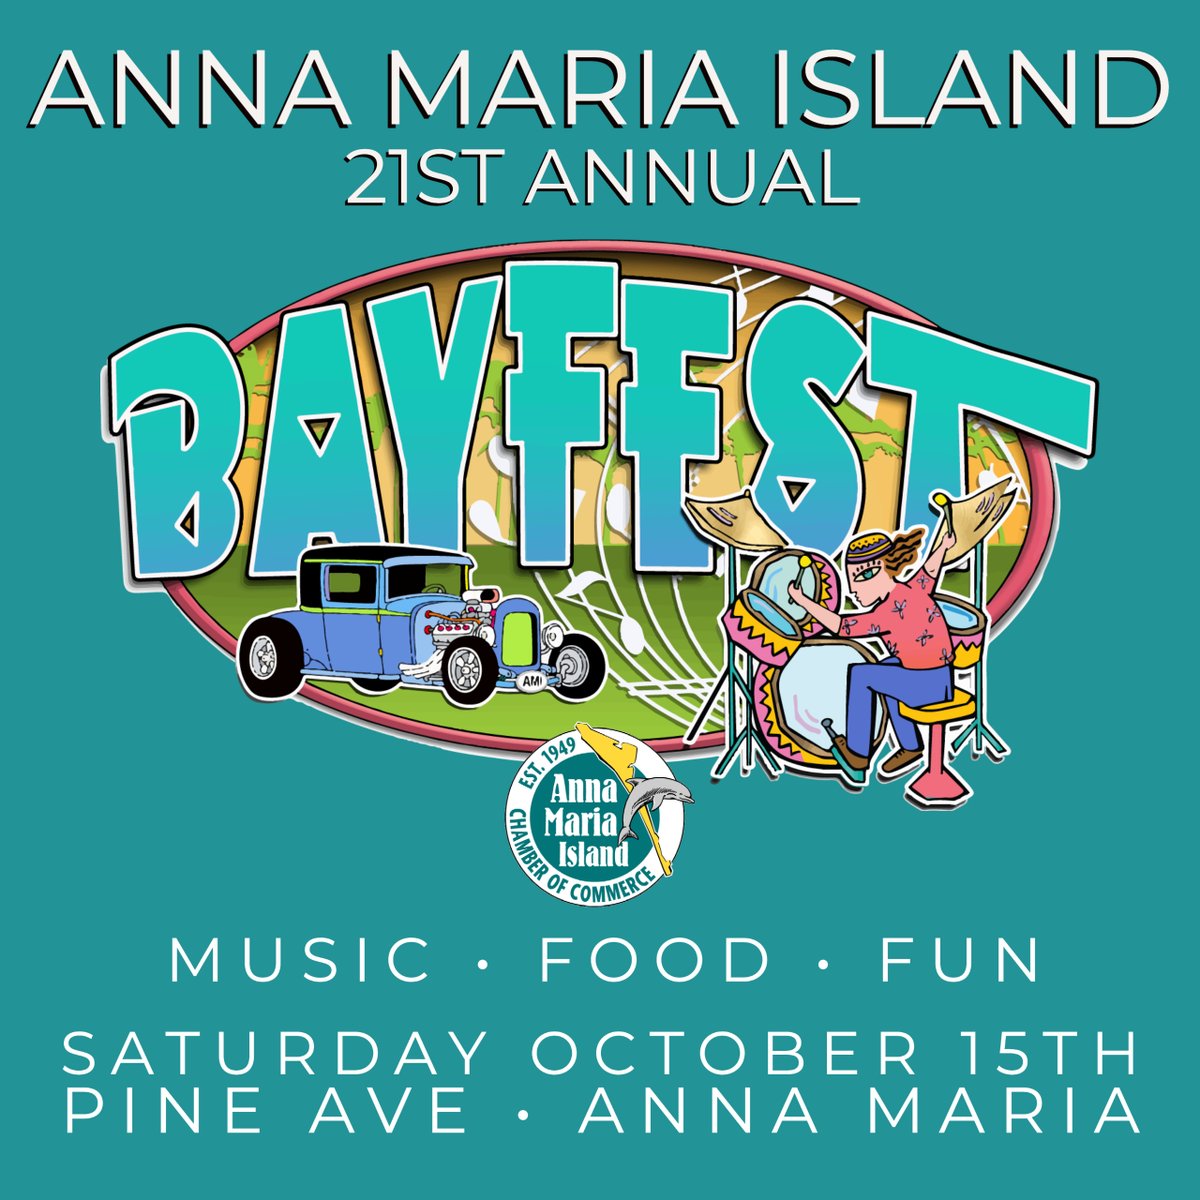 Tomorrow is Bayfest! 🏖🎸🍻 It all starts at 10AM - 9PM Oct 15th right on Pine Ave #annamariaisland